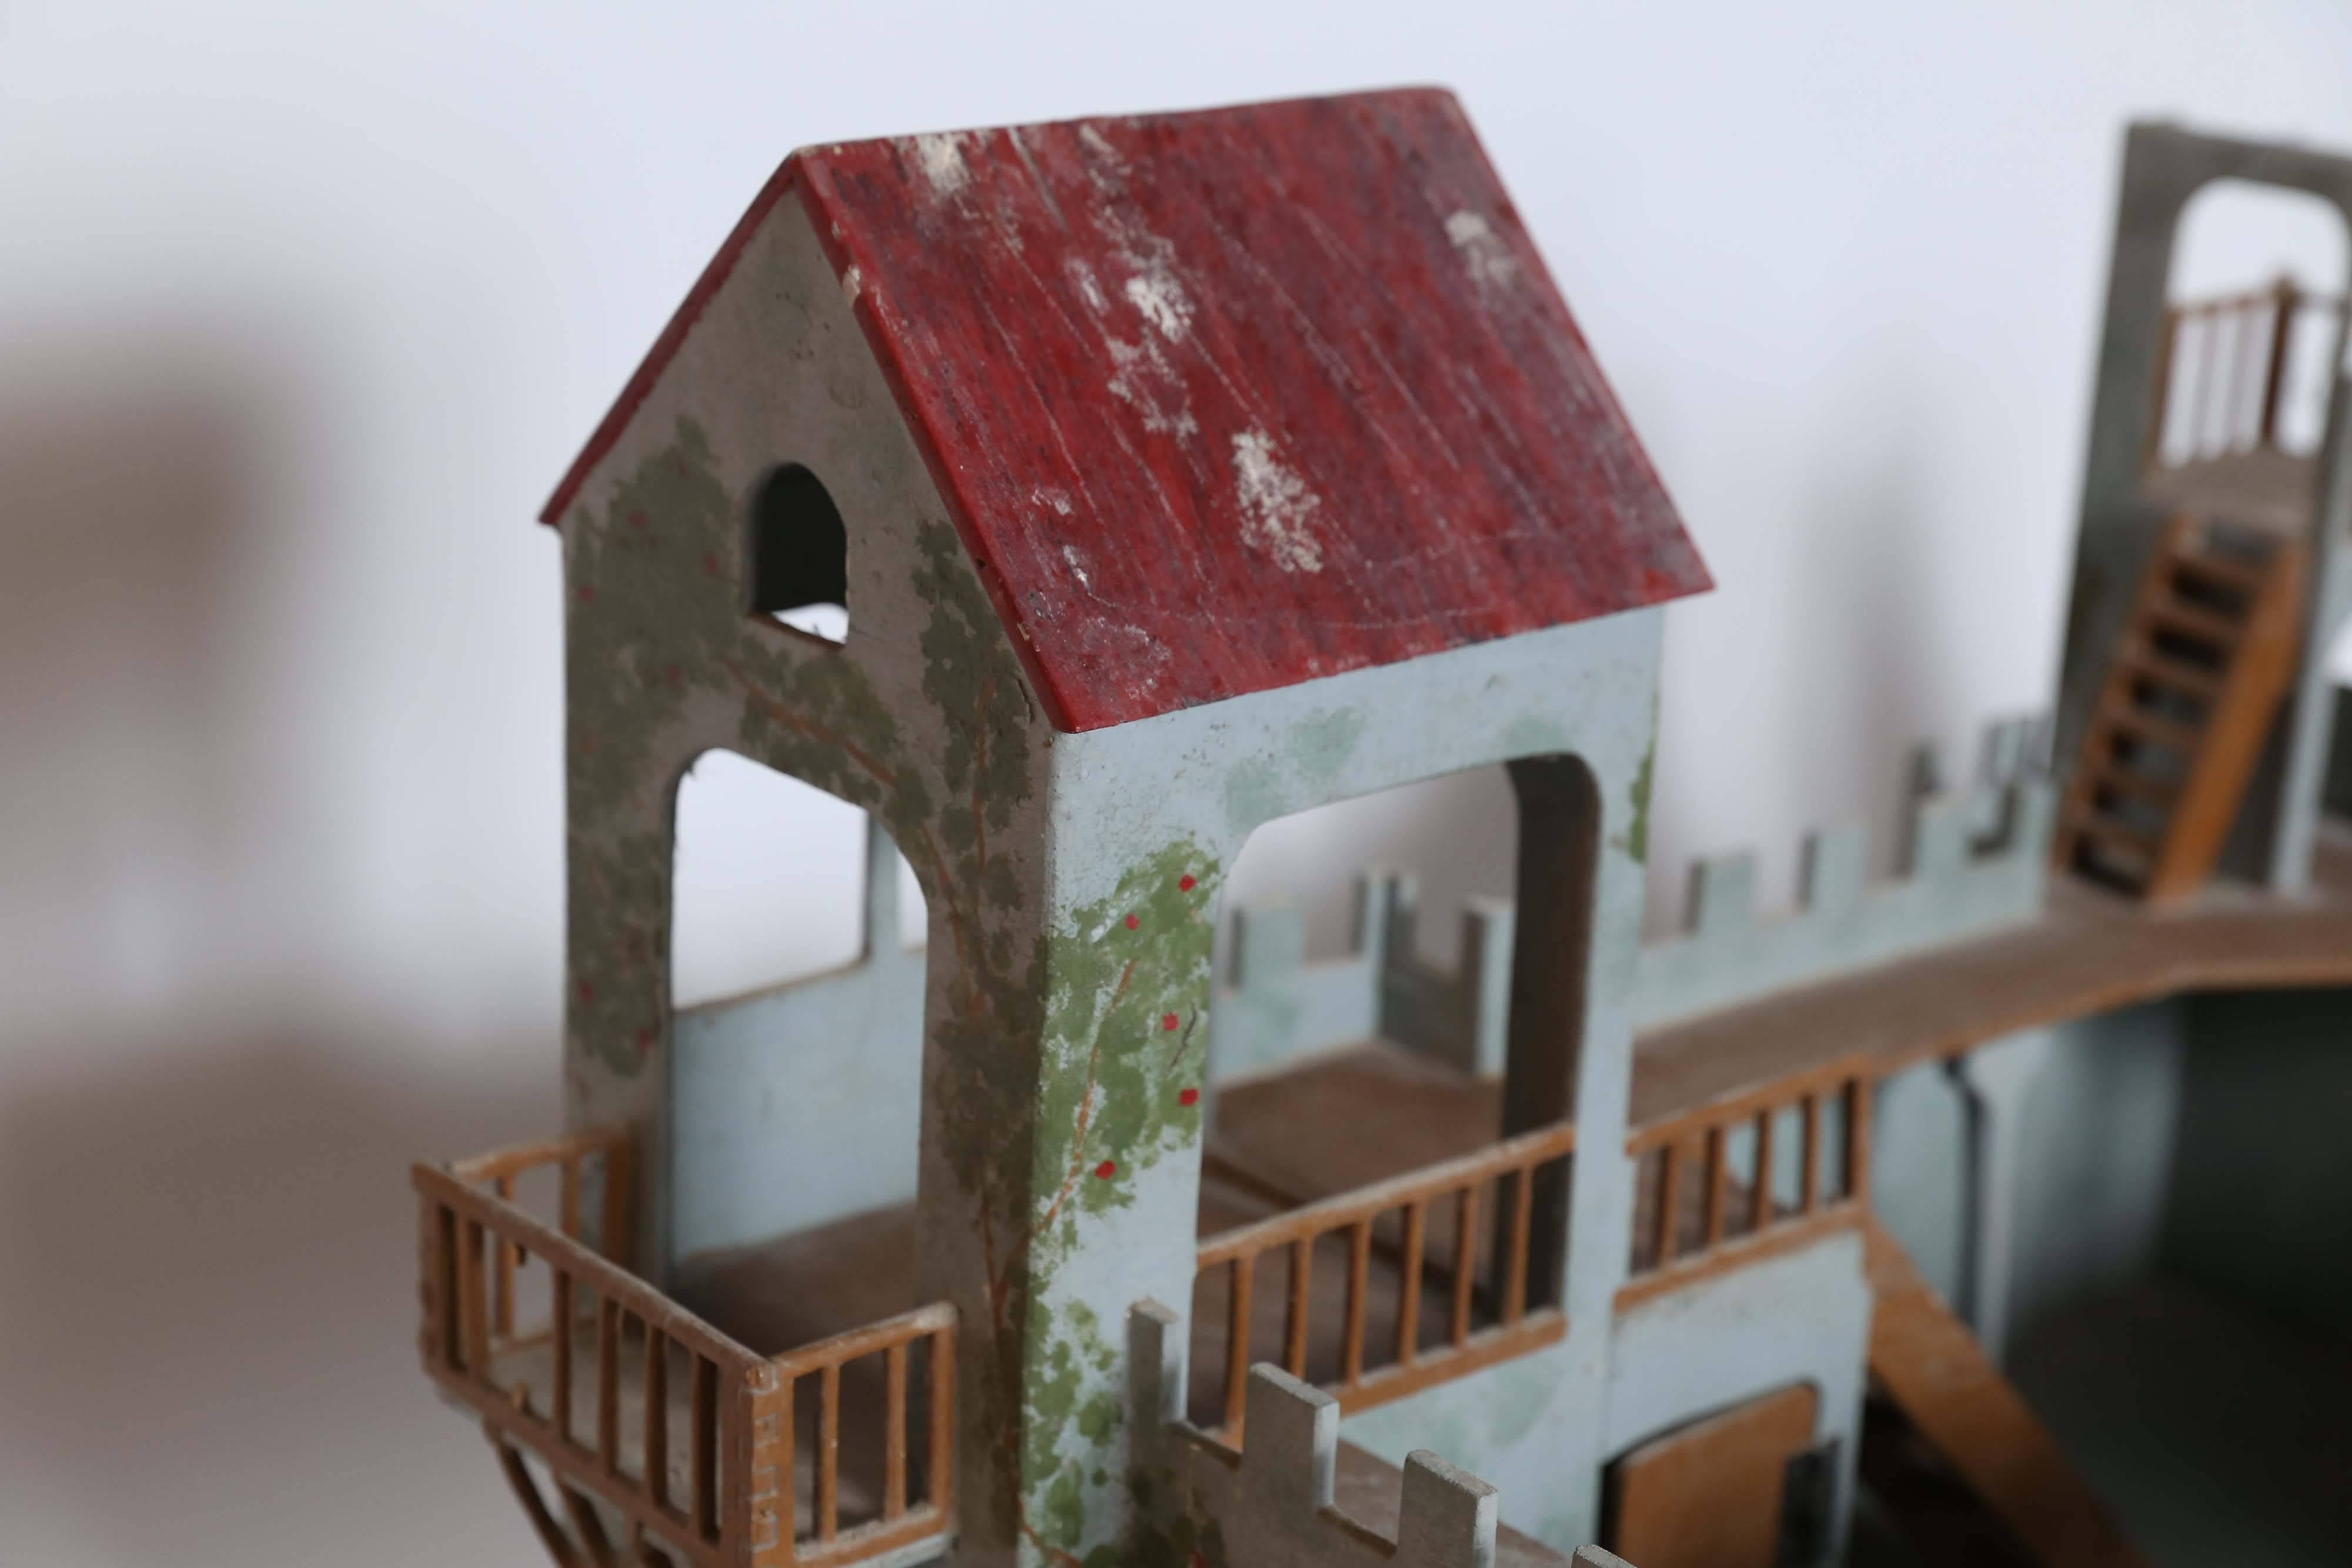 A charming model of a Medieval fort from the Elastolin division of the O.M. Hausser toy company of Germany. Vines and flowers climb the sides of the fort which has a working drawbridge, a bastille, turrets and towers. It comes with an Elastolin